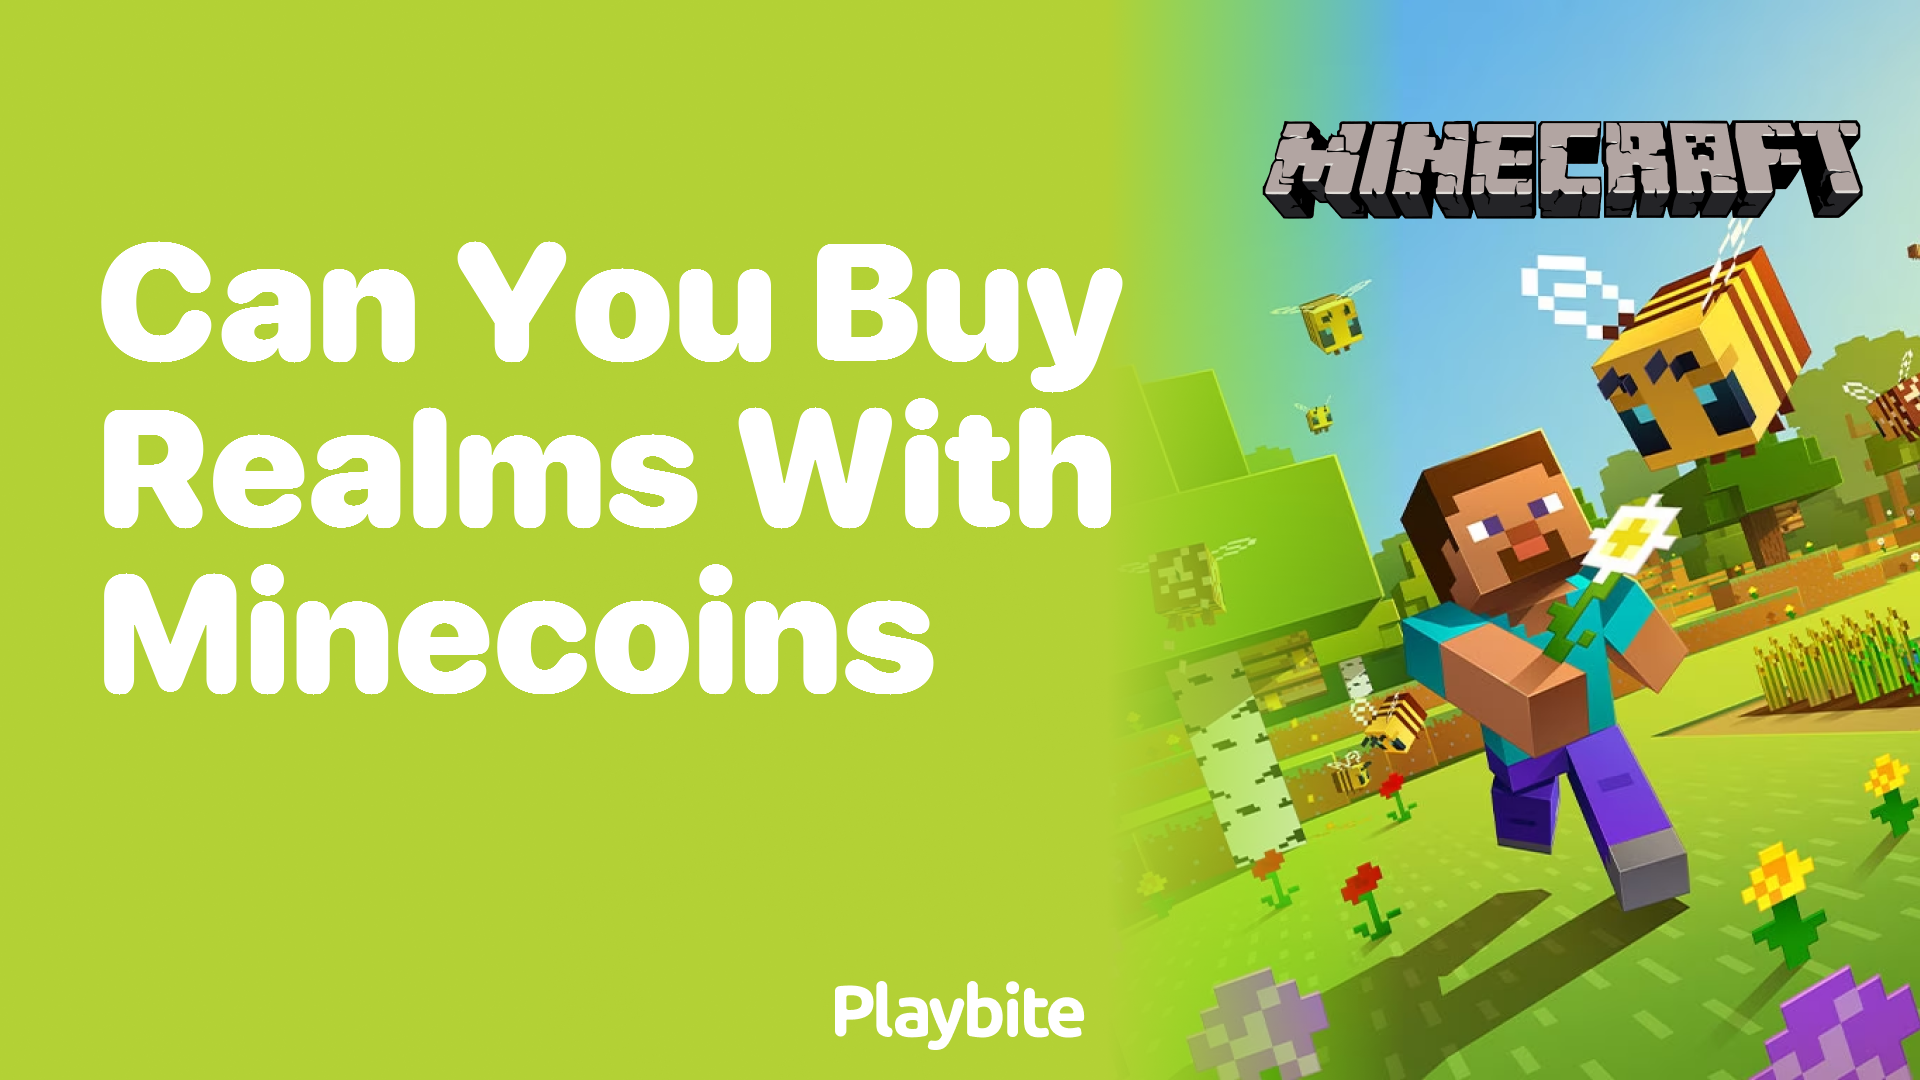 Can You Buy Realms with Minecoins?